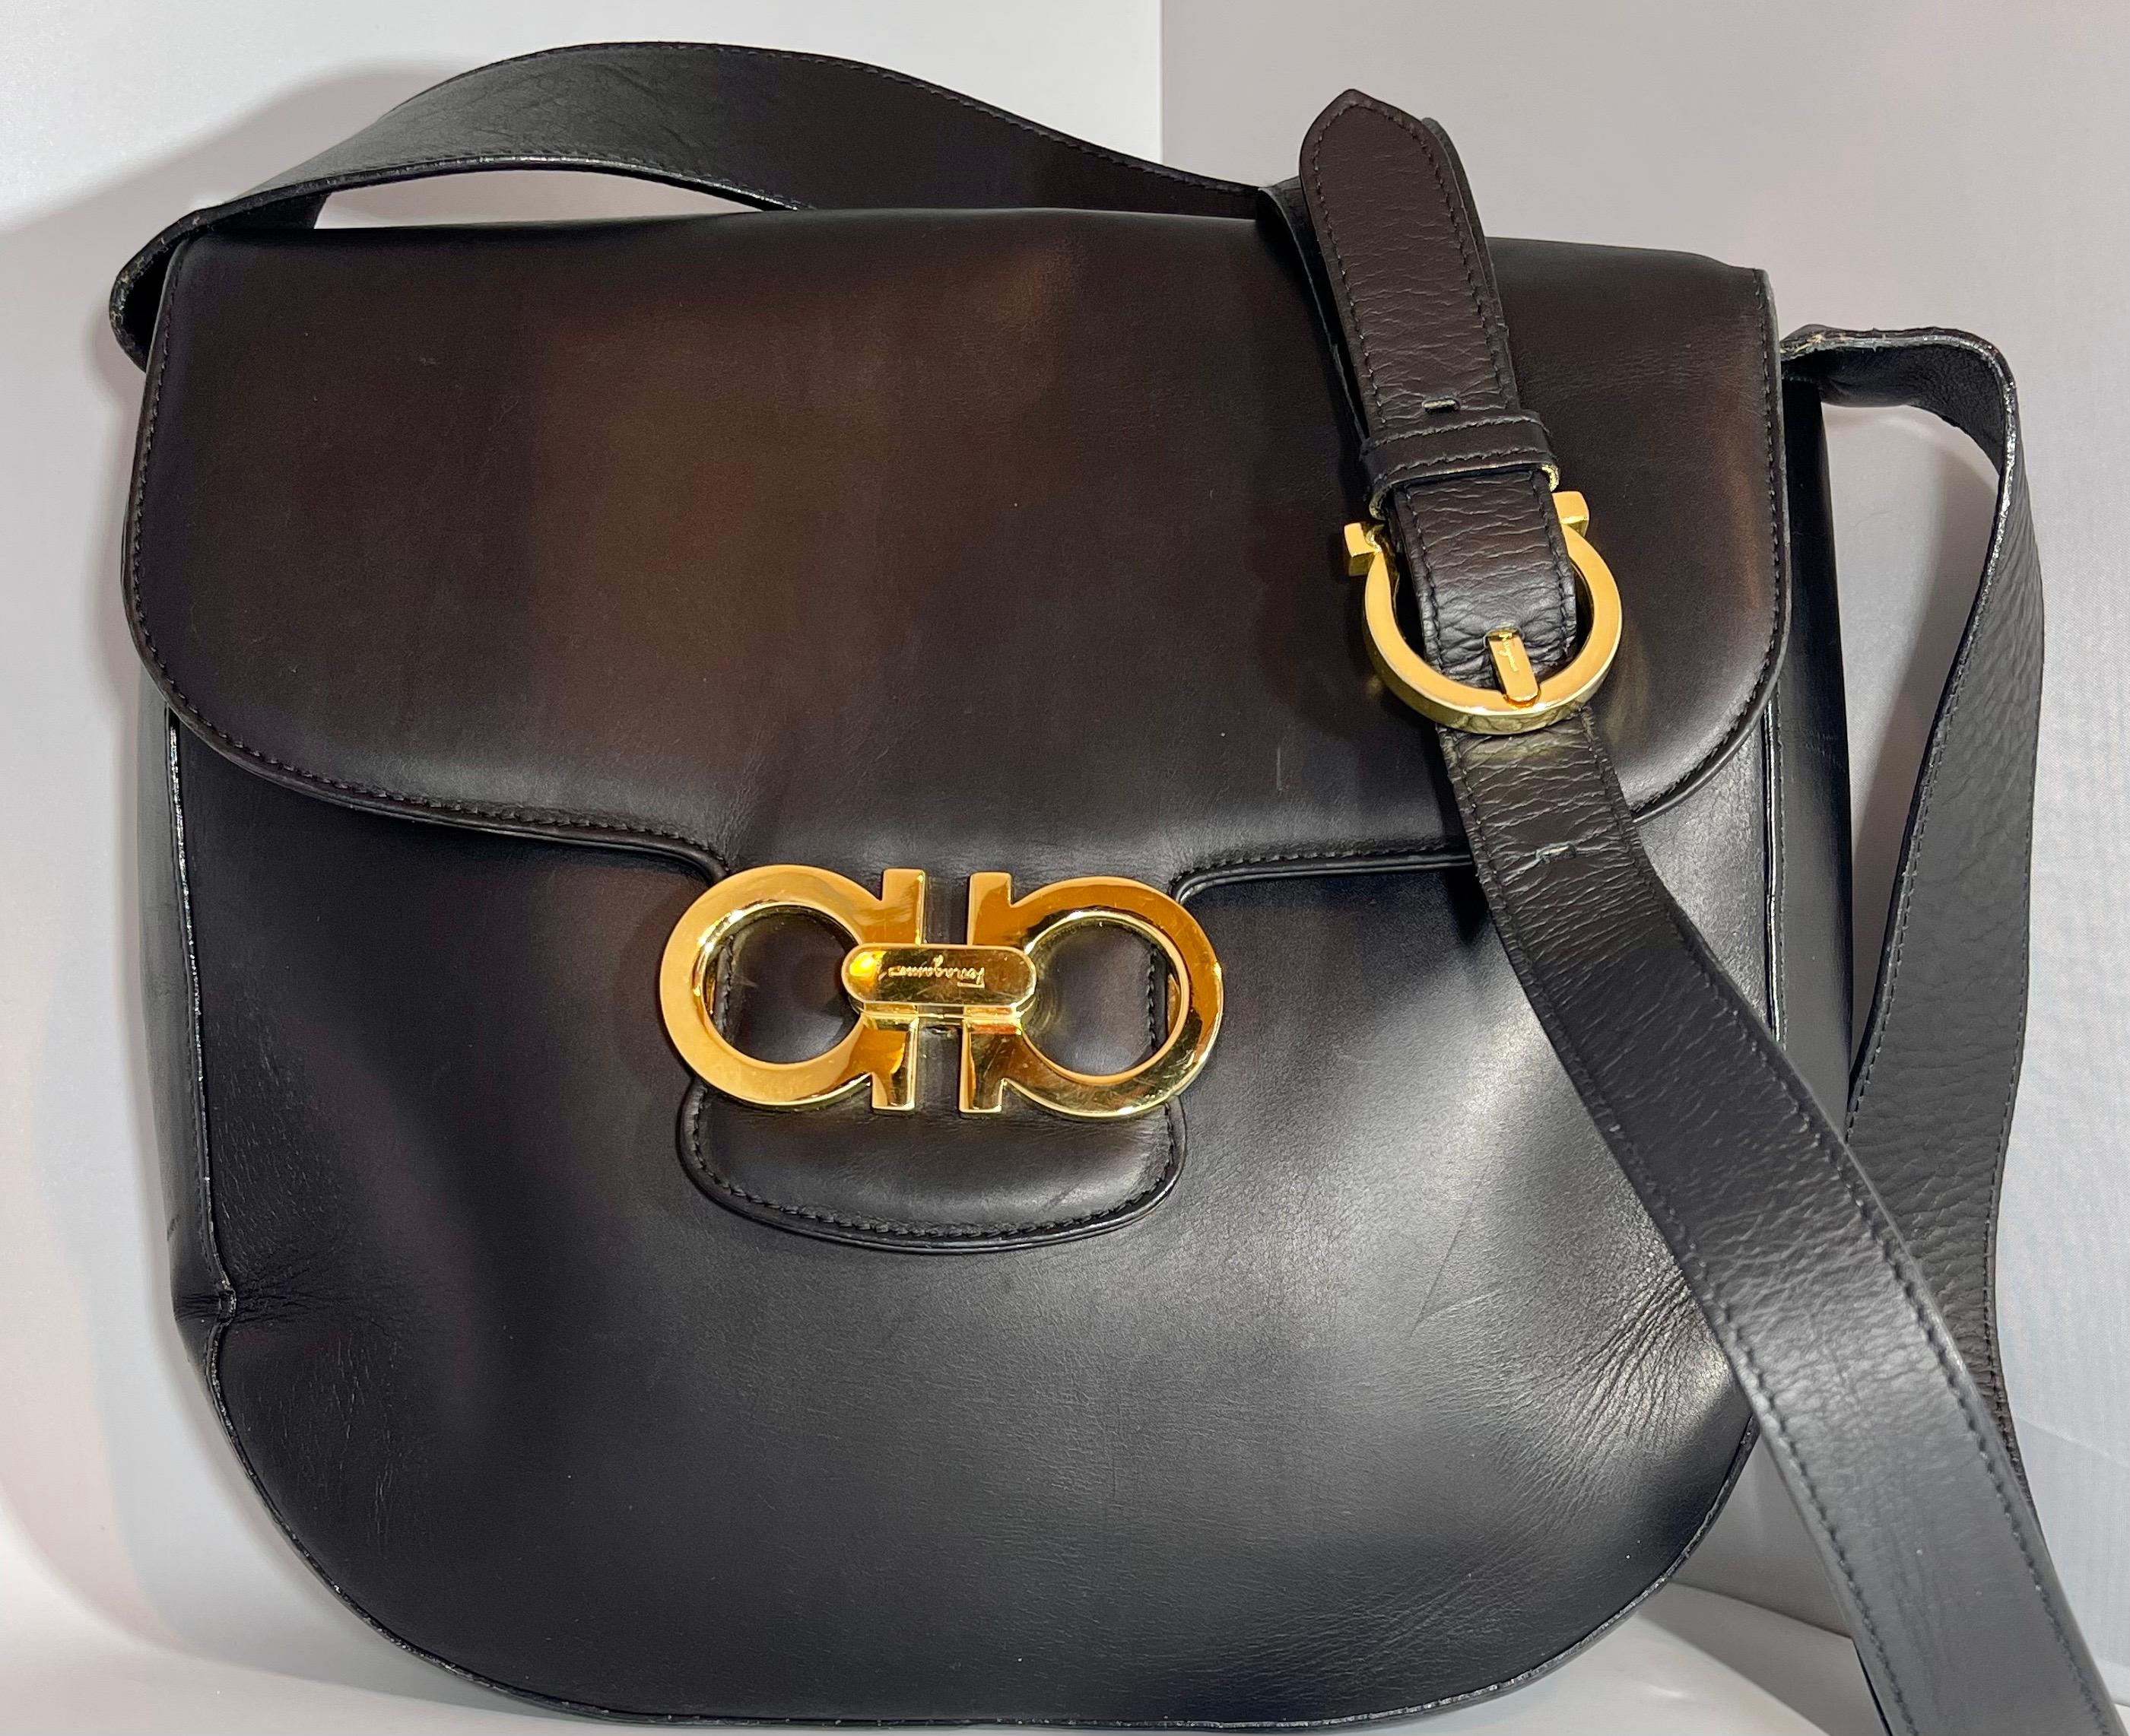 Salvatore Ferragamo Black  Leather Tote / Shoulder Bag  with Gold Hardware
Ferragamo Black smooth leather tote with  gold front clutch
Opens in to a very spacious   one Compartment and  and a large zippered pocket. 
It also has a key ring hanging